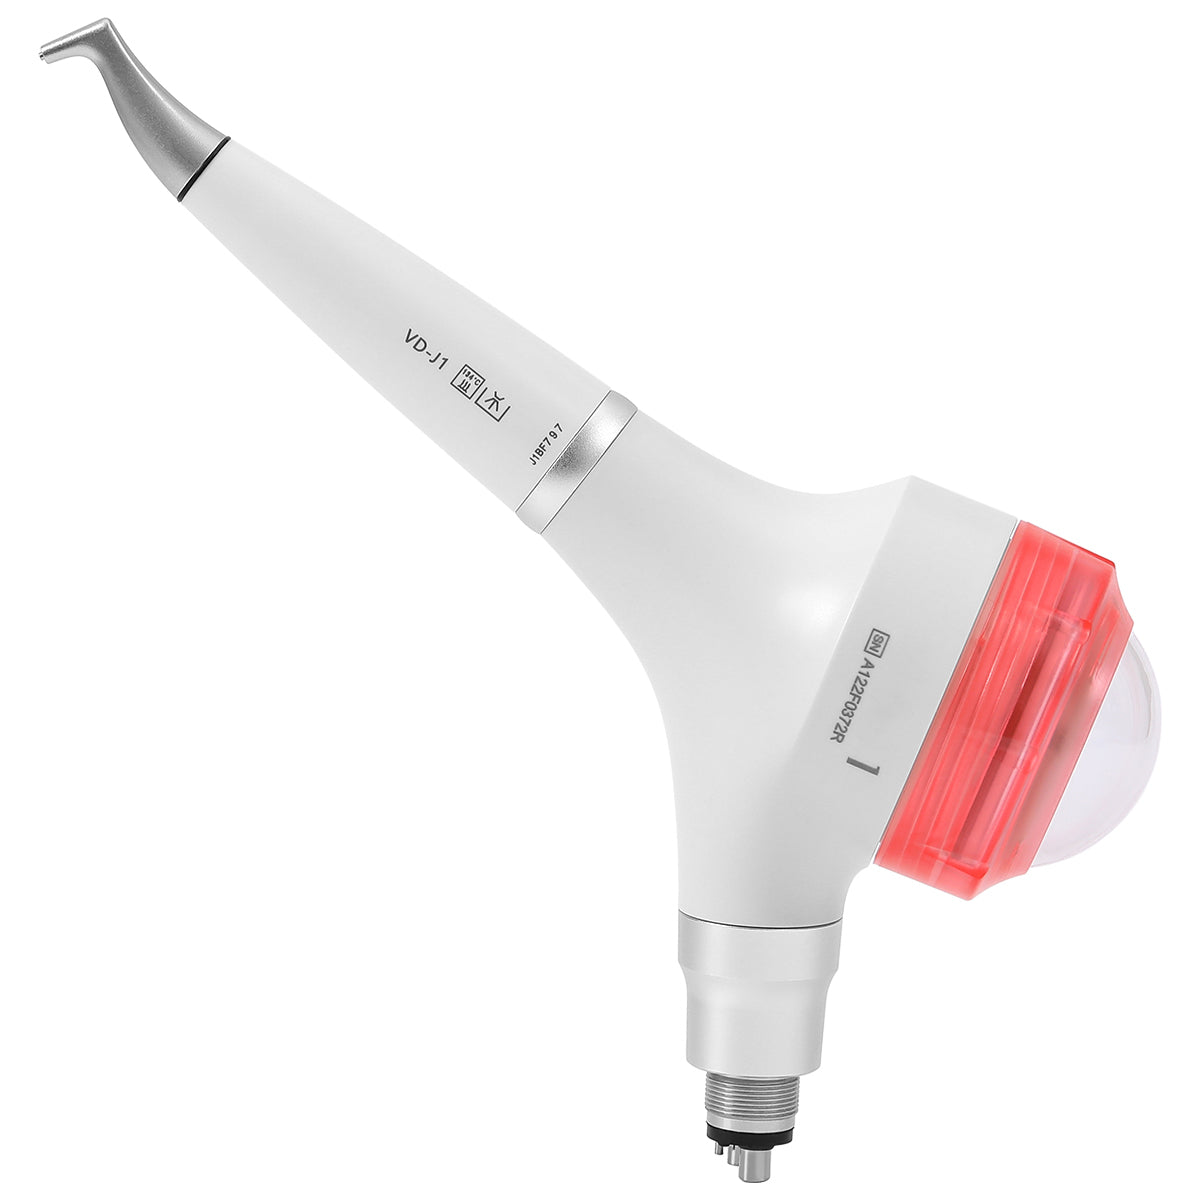 ZDENT Dental Air Polisher Prophy Teeth Whitening A1S Detachable 360° Rotating Handpiece With 4 Holes Quick Coupler Red - azdentall.com